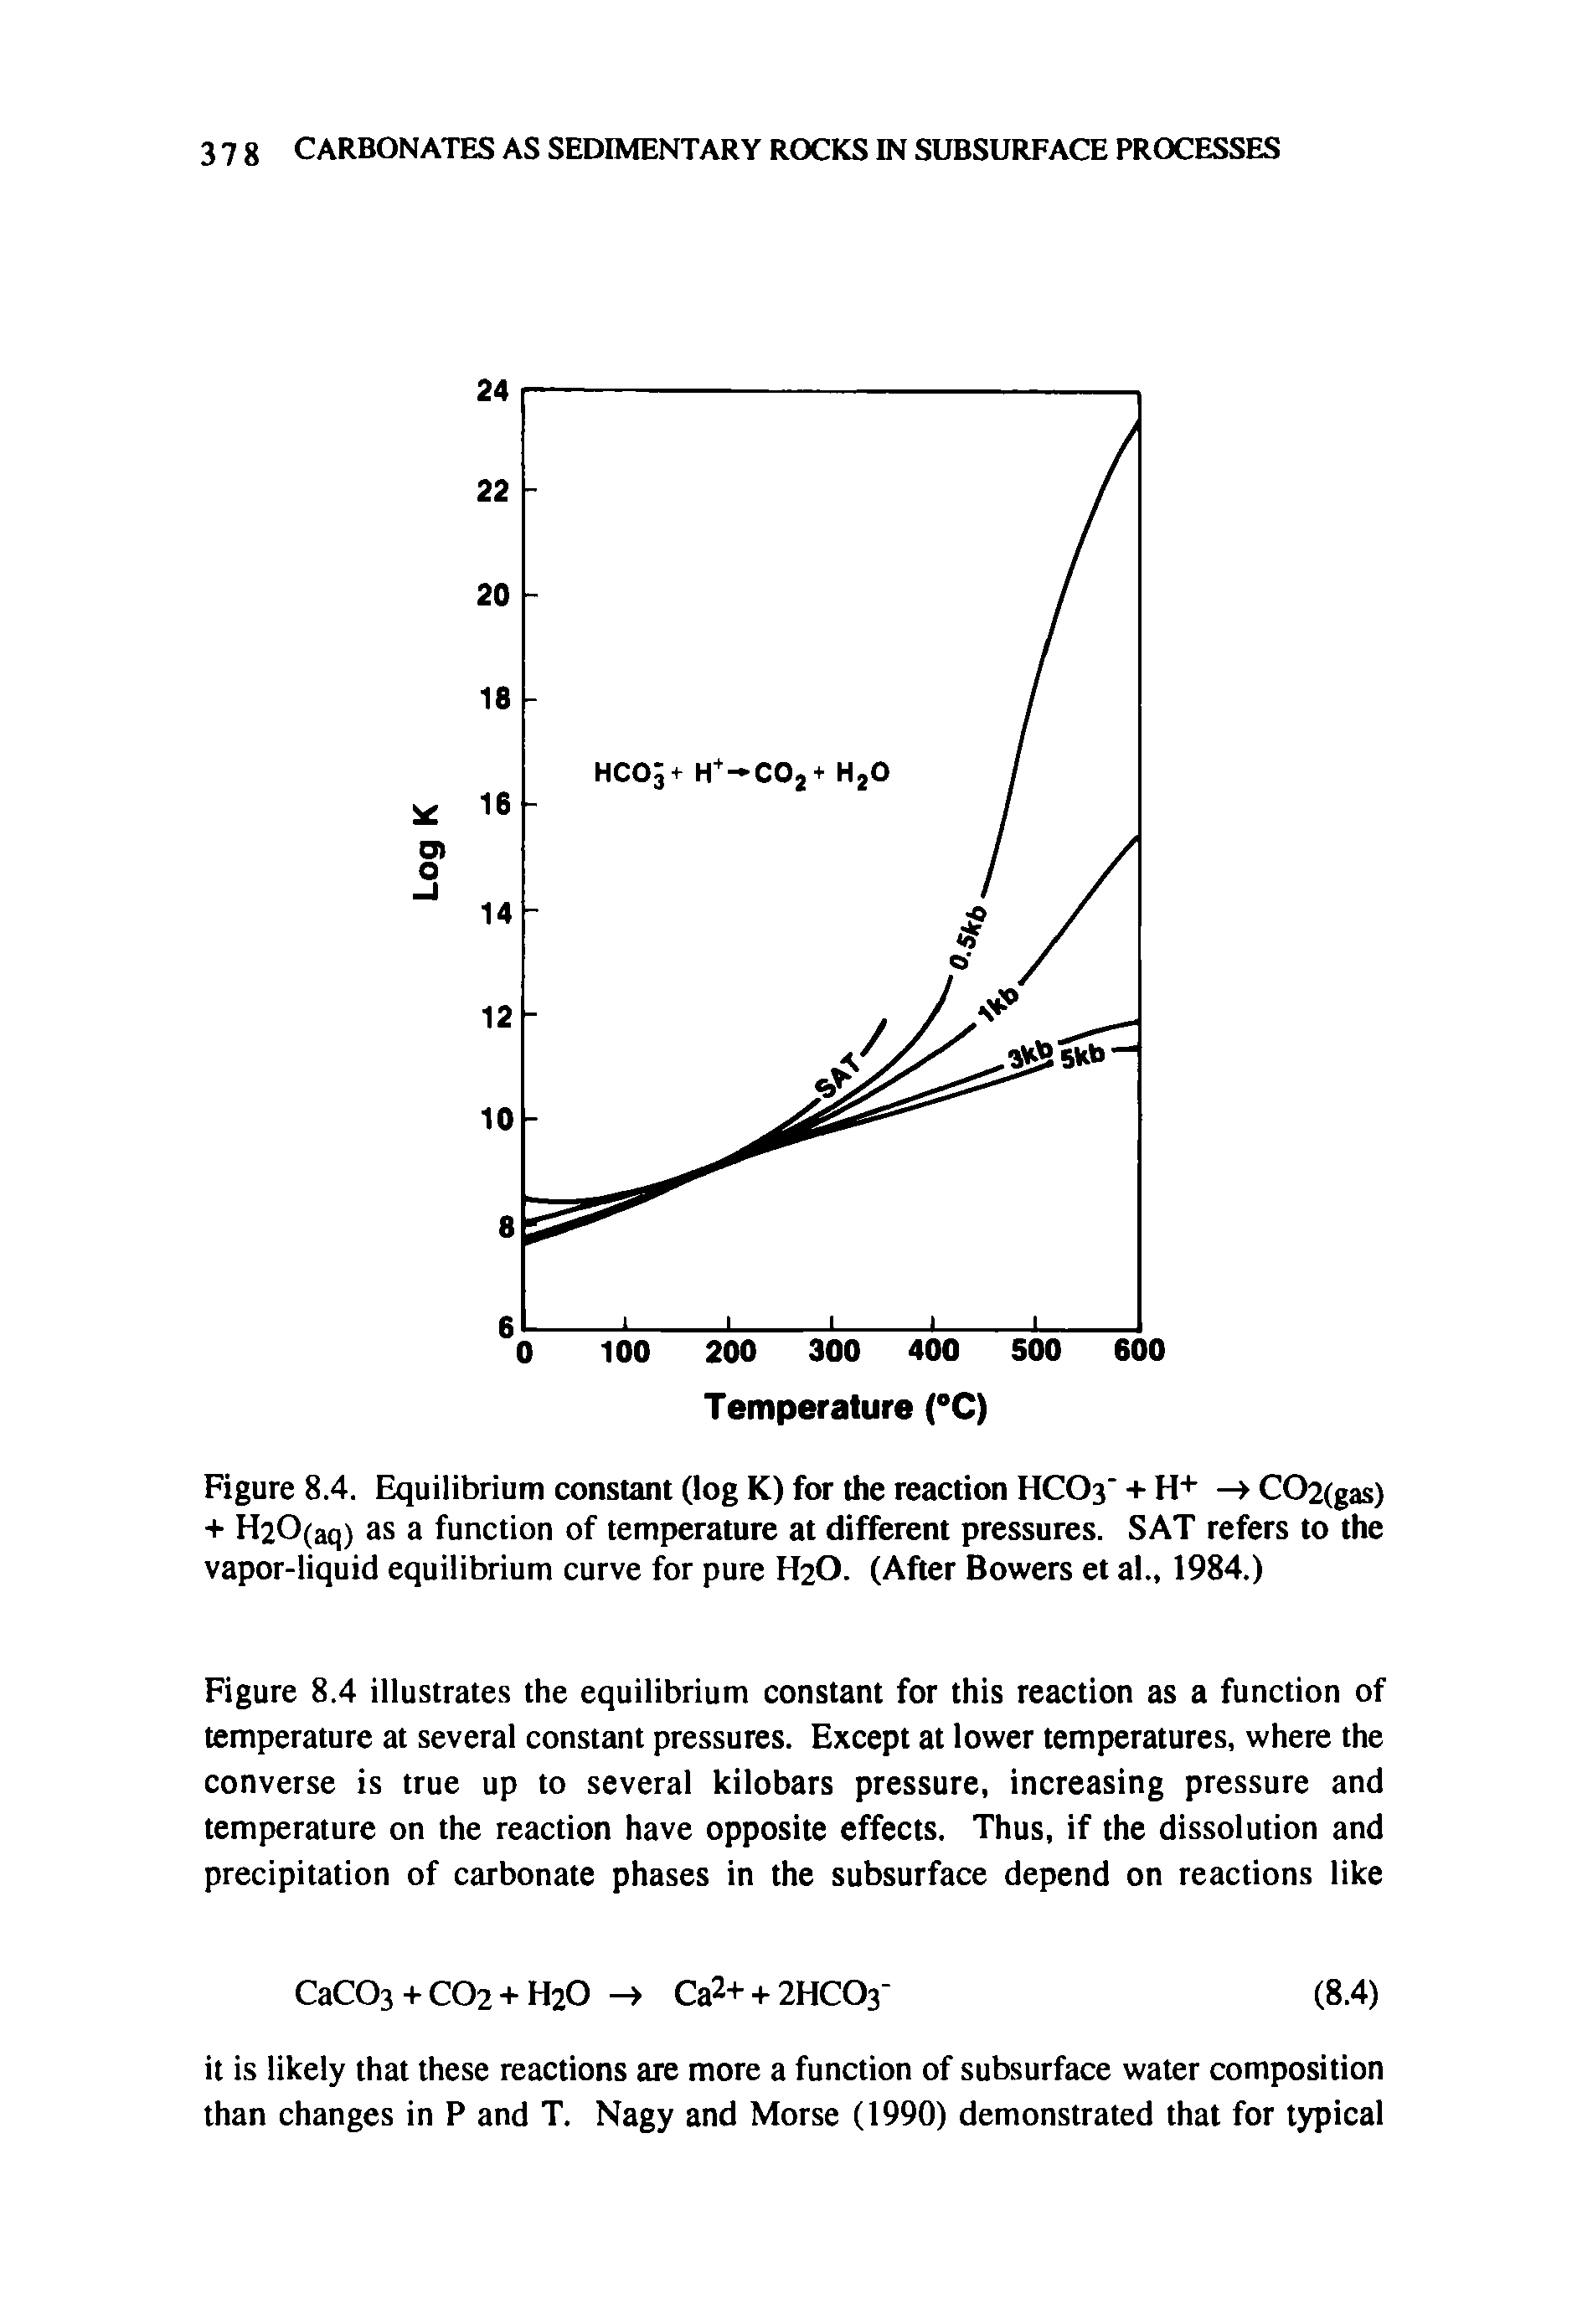 Figure 8.4. Equilibrium constant (log K) for the reaction HCC>3 + H+ — CC>2(gas) + H20(aq) as a function of temperature at different pressures. SAT refers to the vapor-liquid equilibrium curve for pure H2O. (After Bowers et al., 1984.)...